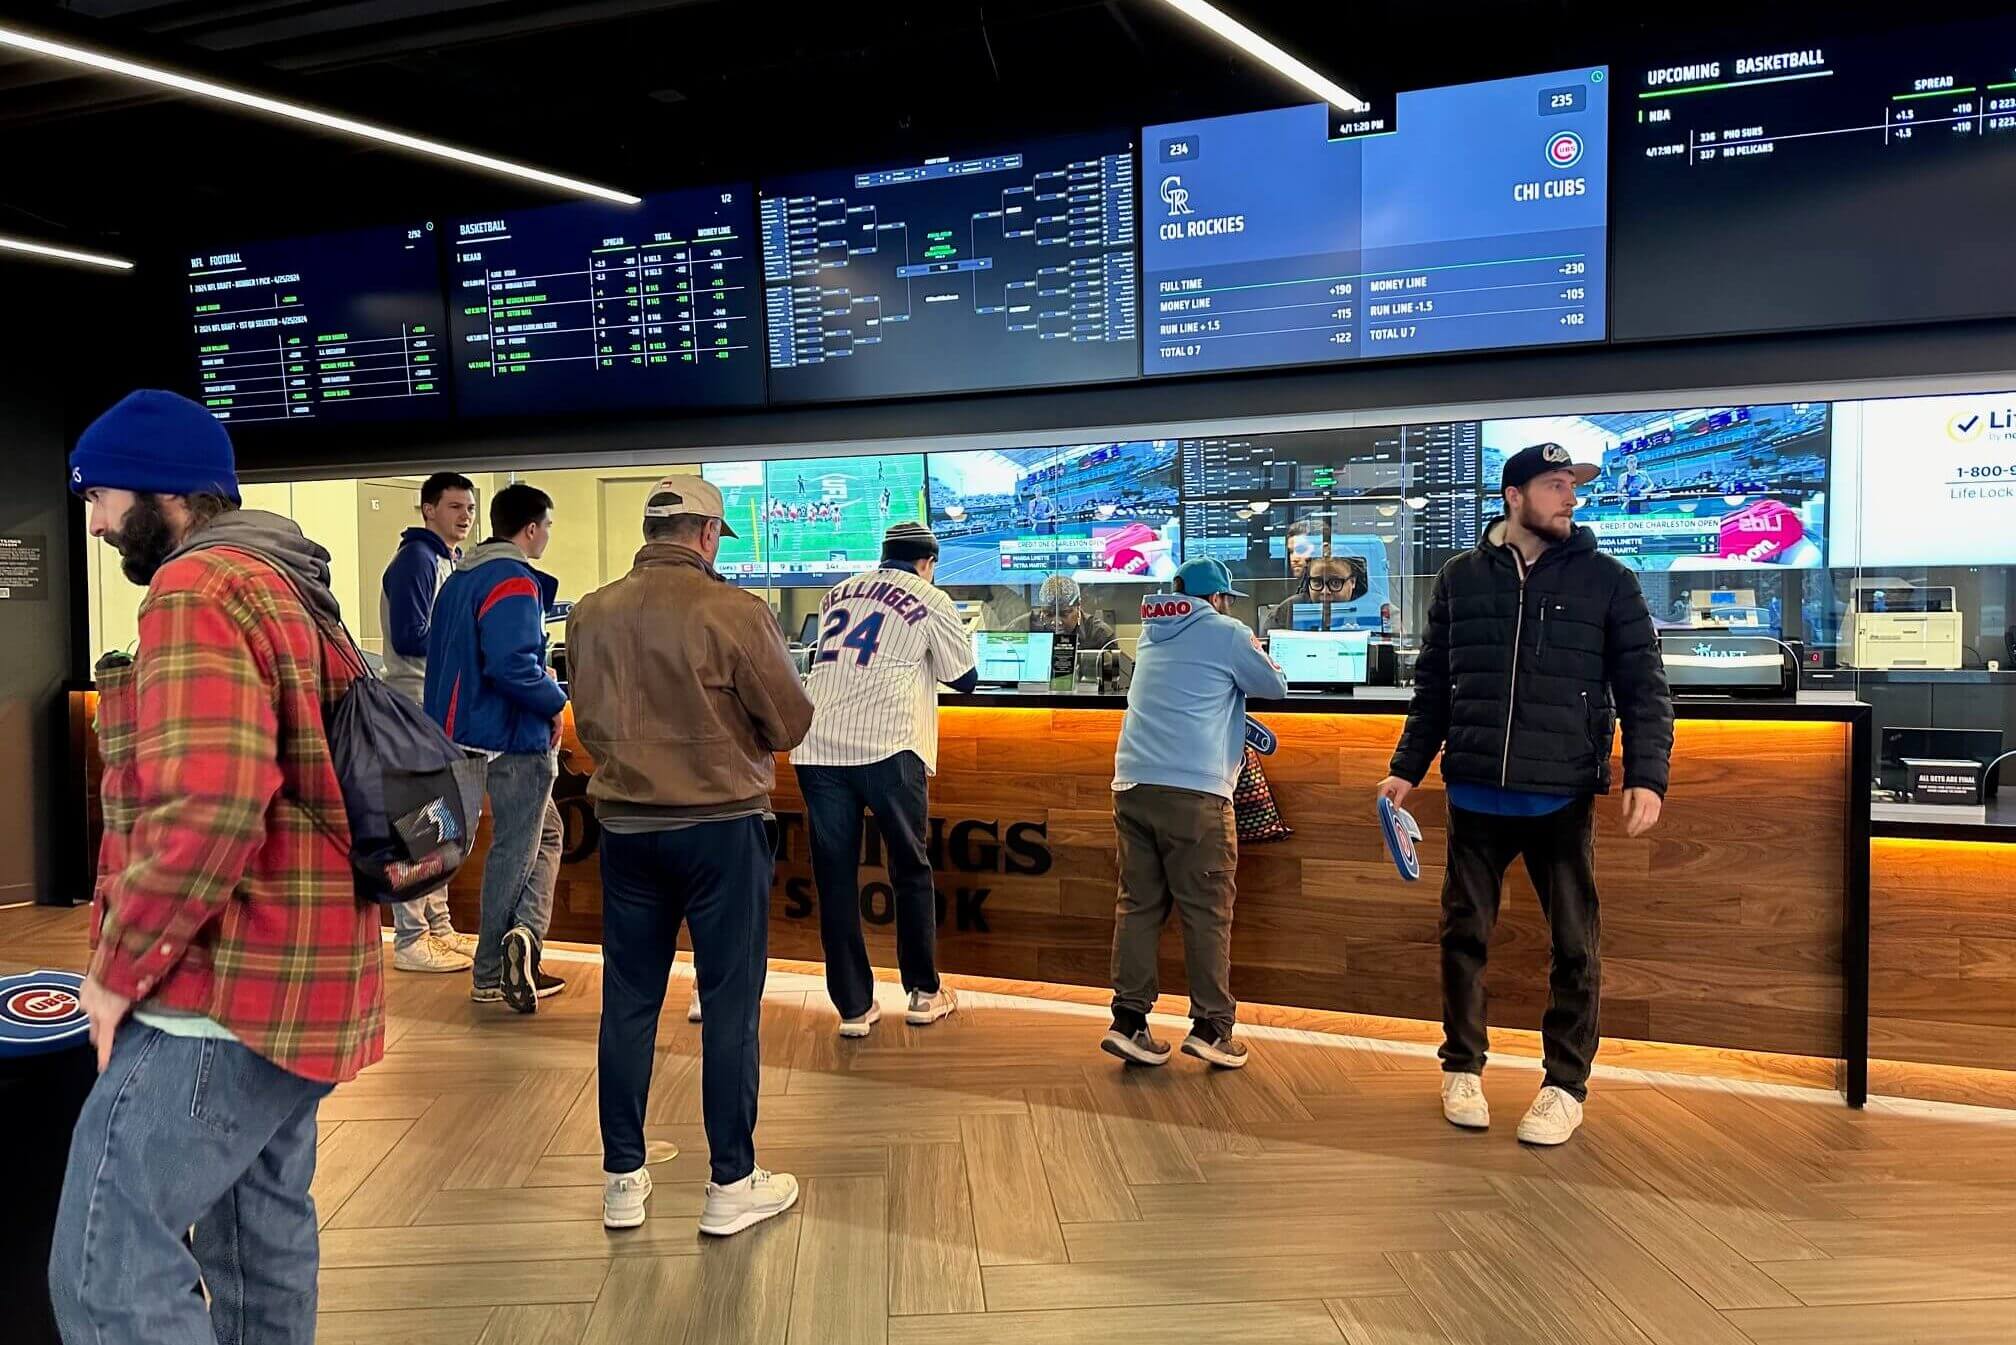 A Sports Betting Haven at Wrigley? Cubs Fans All In!